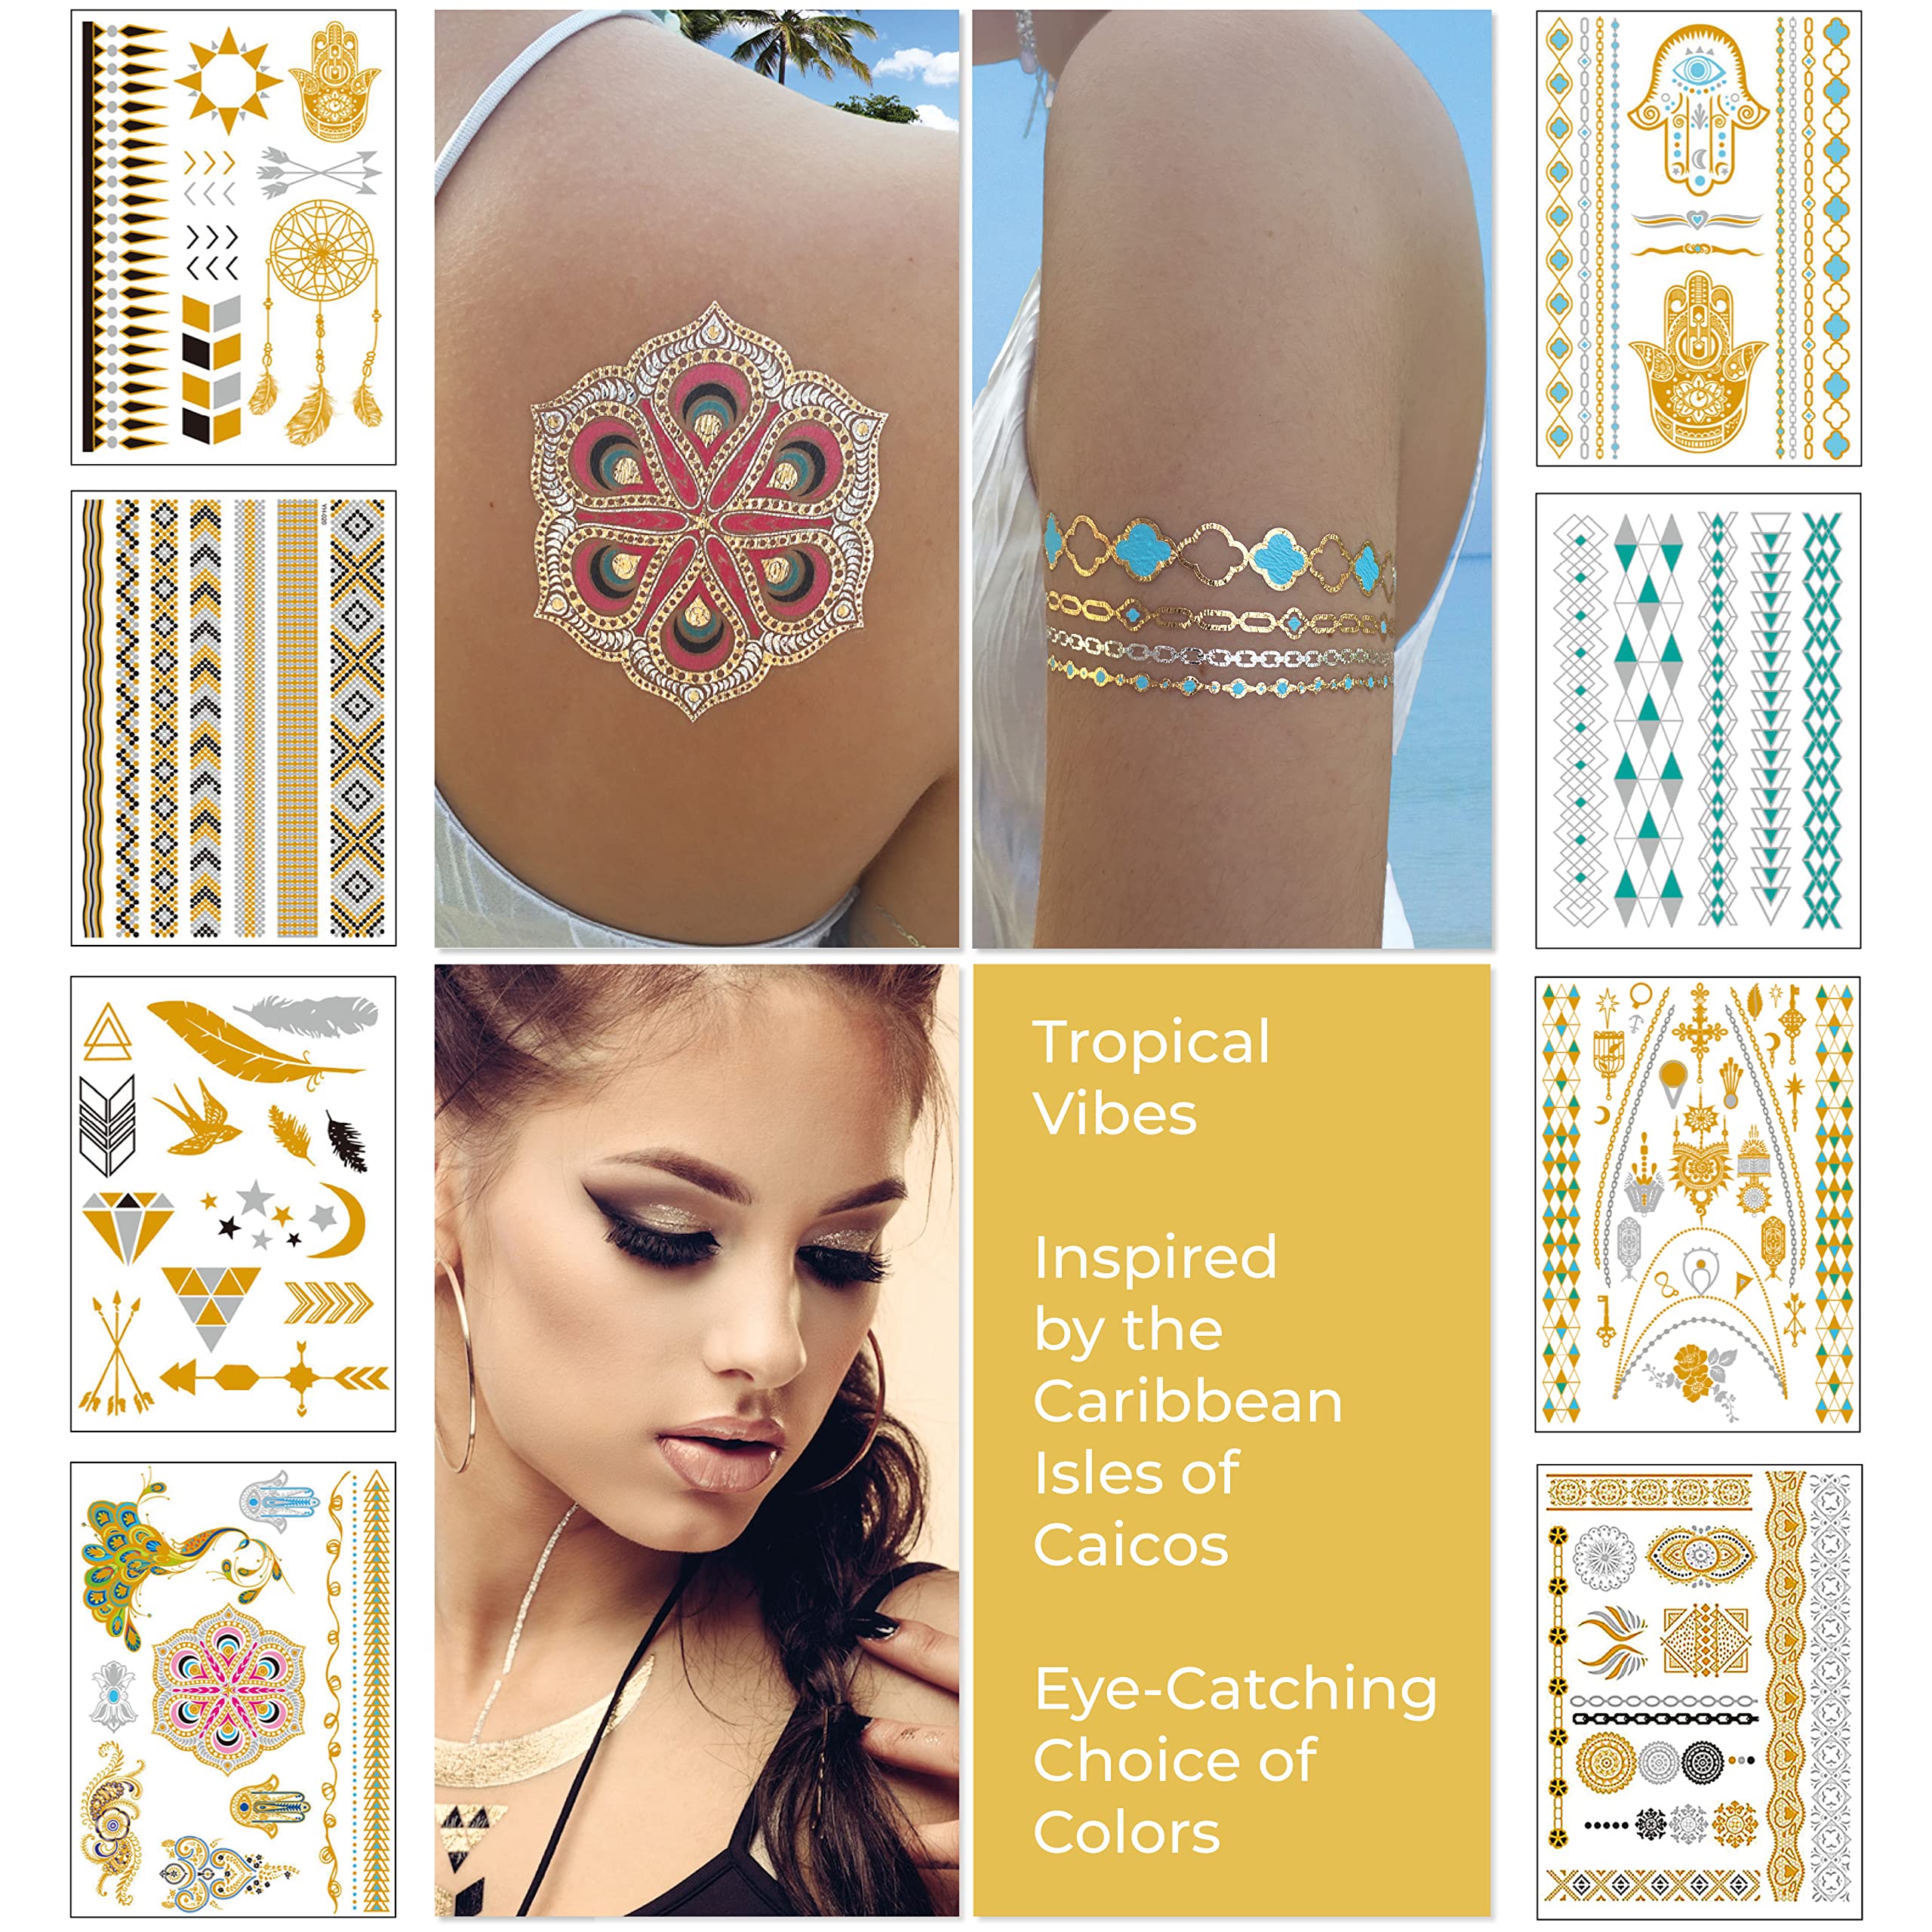 Metallic Temporary Tattoos for Women Teens Girls - 8 Sheets Gold Silver Temporary Tats Glitter Shimmer Designs Jewelry Tattoos - 100+ Color Flash Fake Waterproof Tattoo Stickers (Caicos)